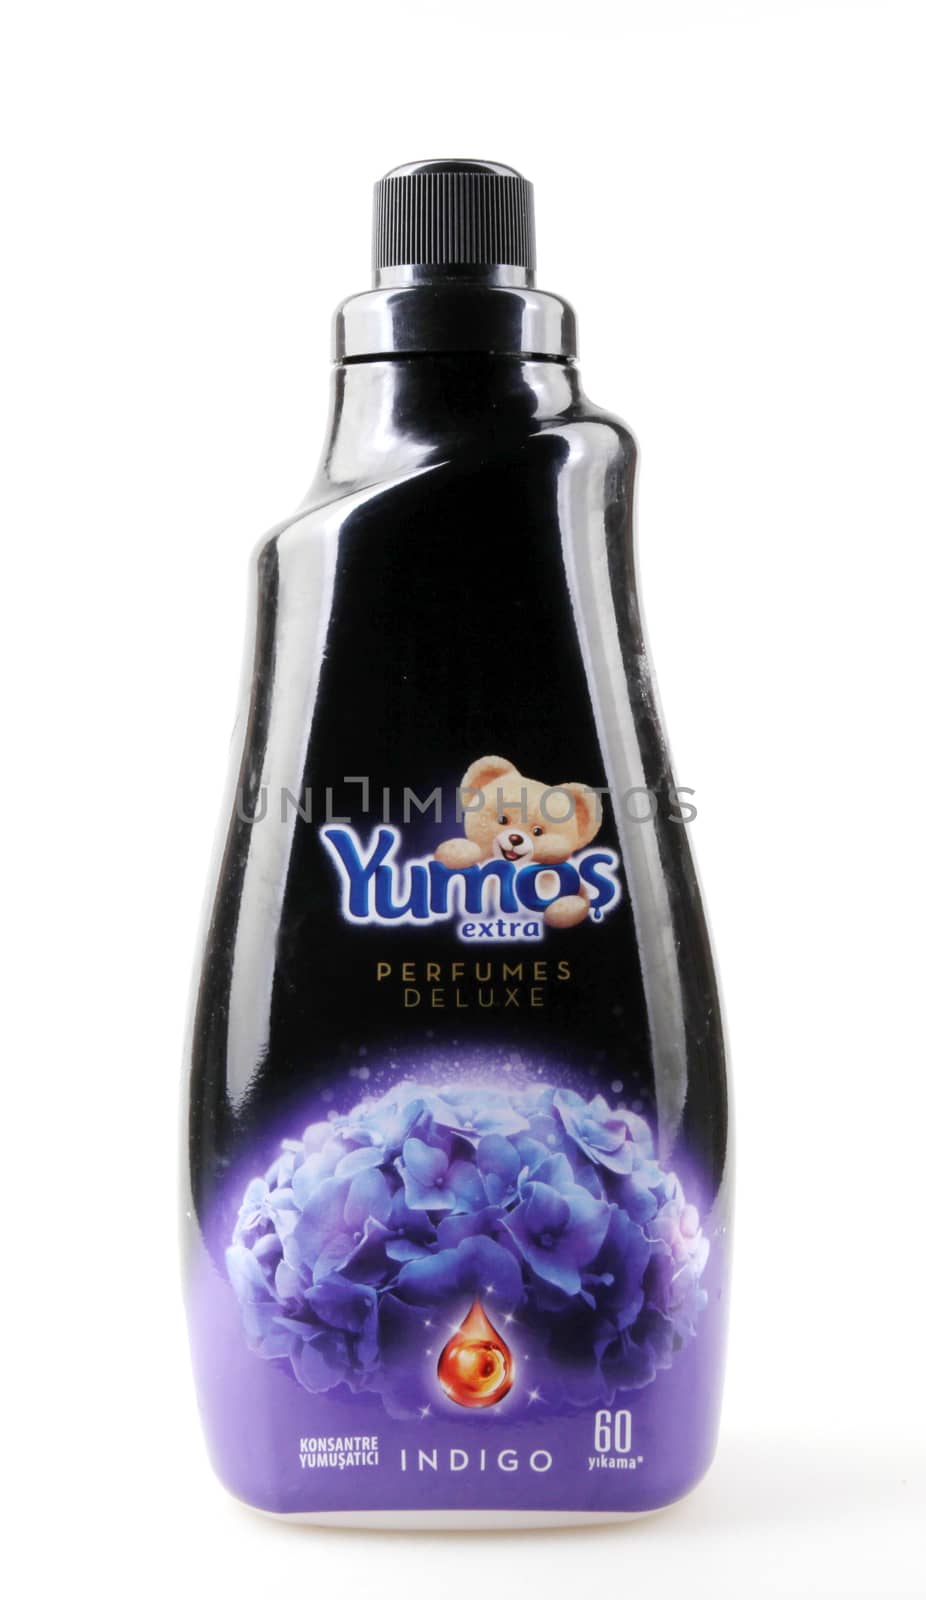 Pomorie, Bulgaria - June 23, 2019: Yumoş is a brand of softeners belonging to Unilever by 2008. In 2008, it was sold to Sun Products, which is already part of Henkel.